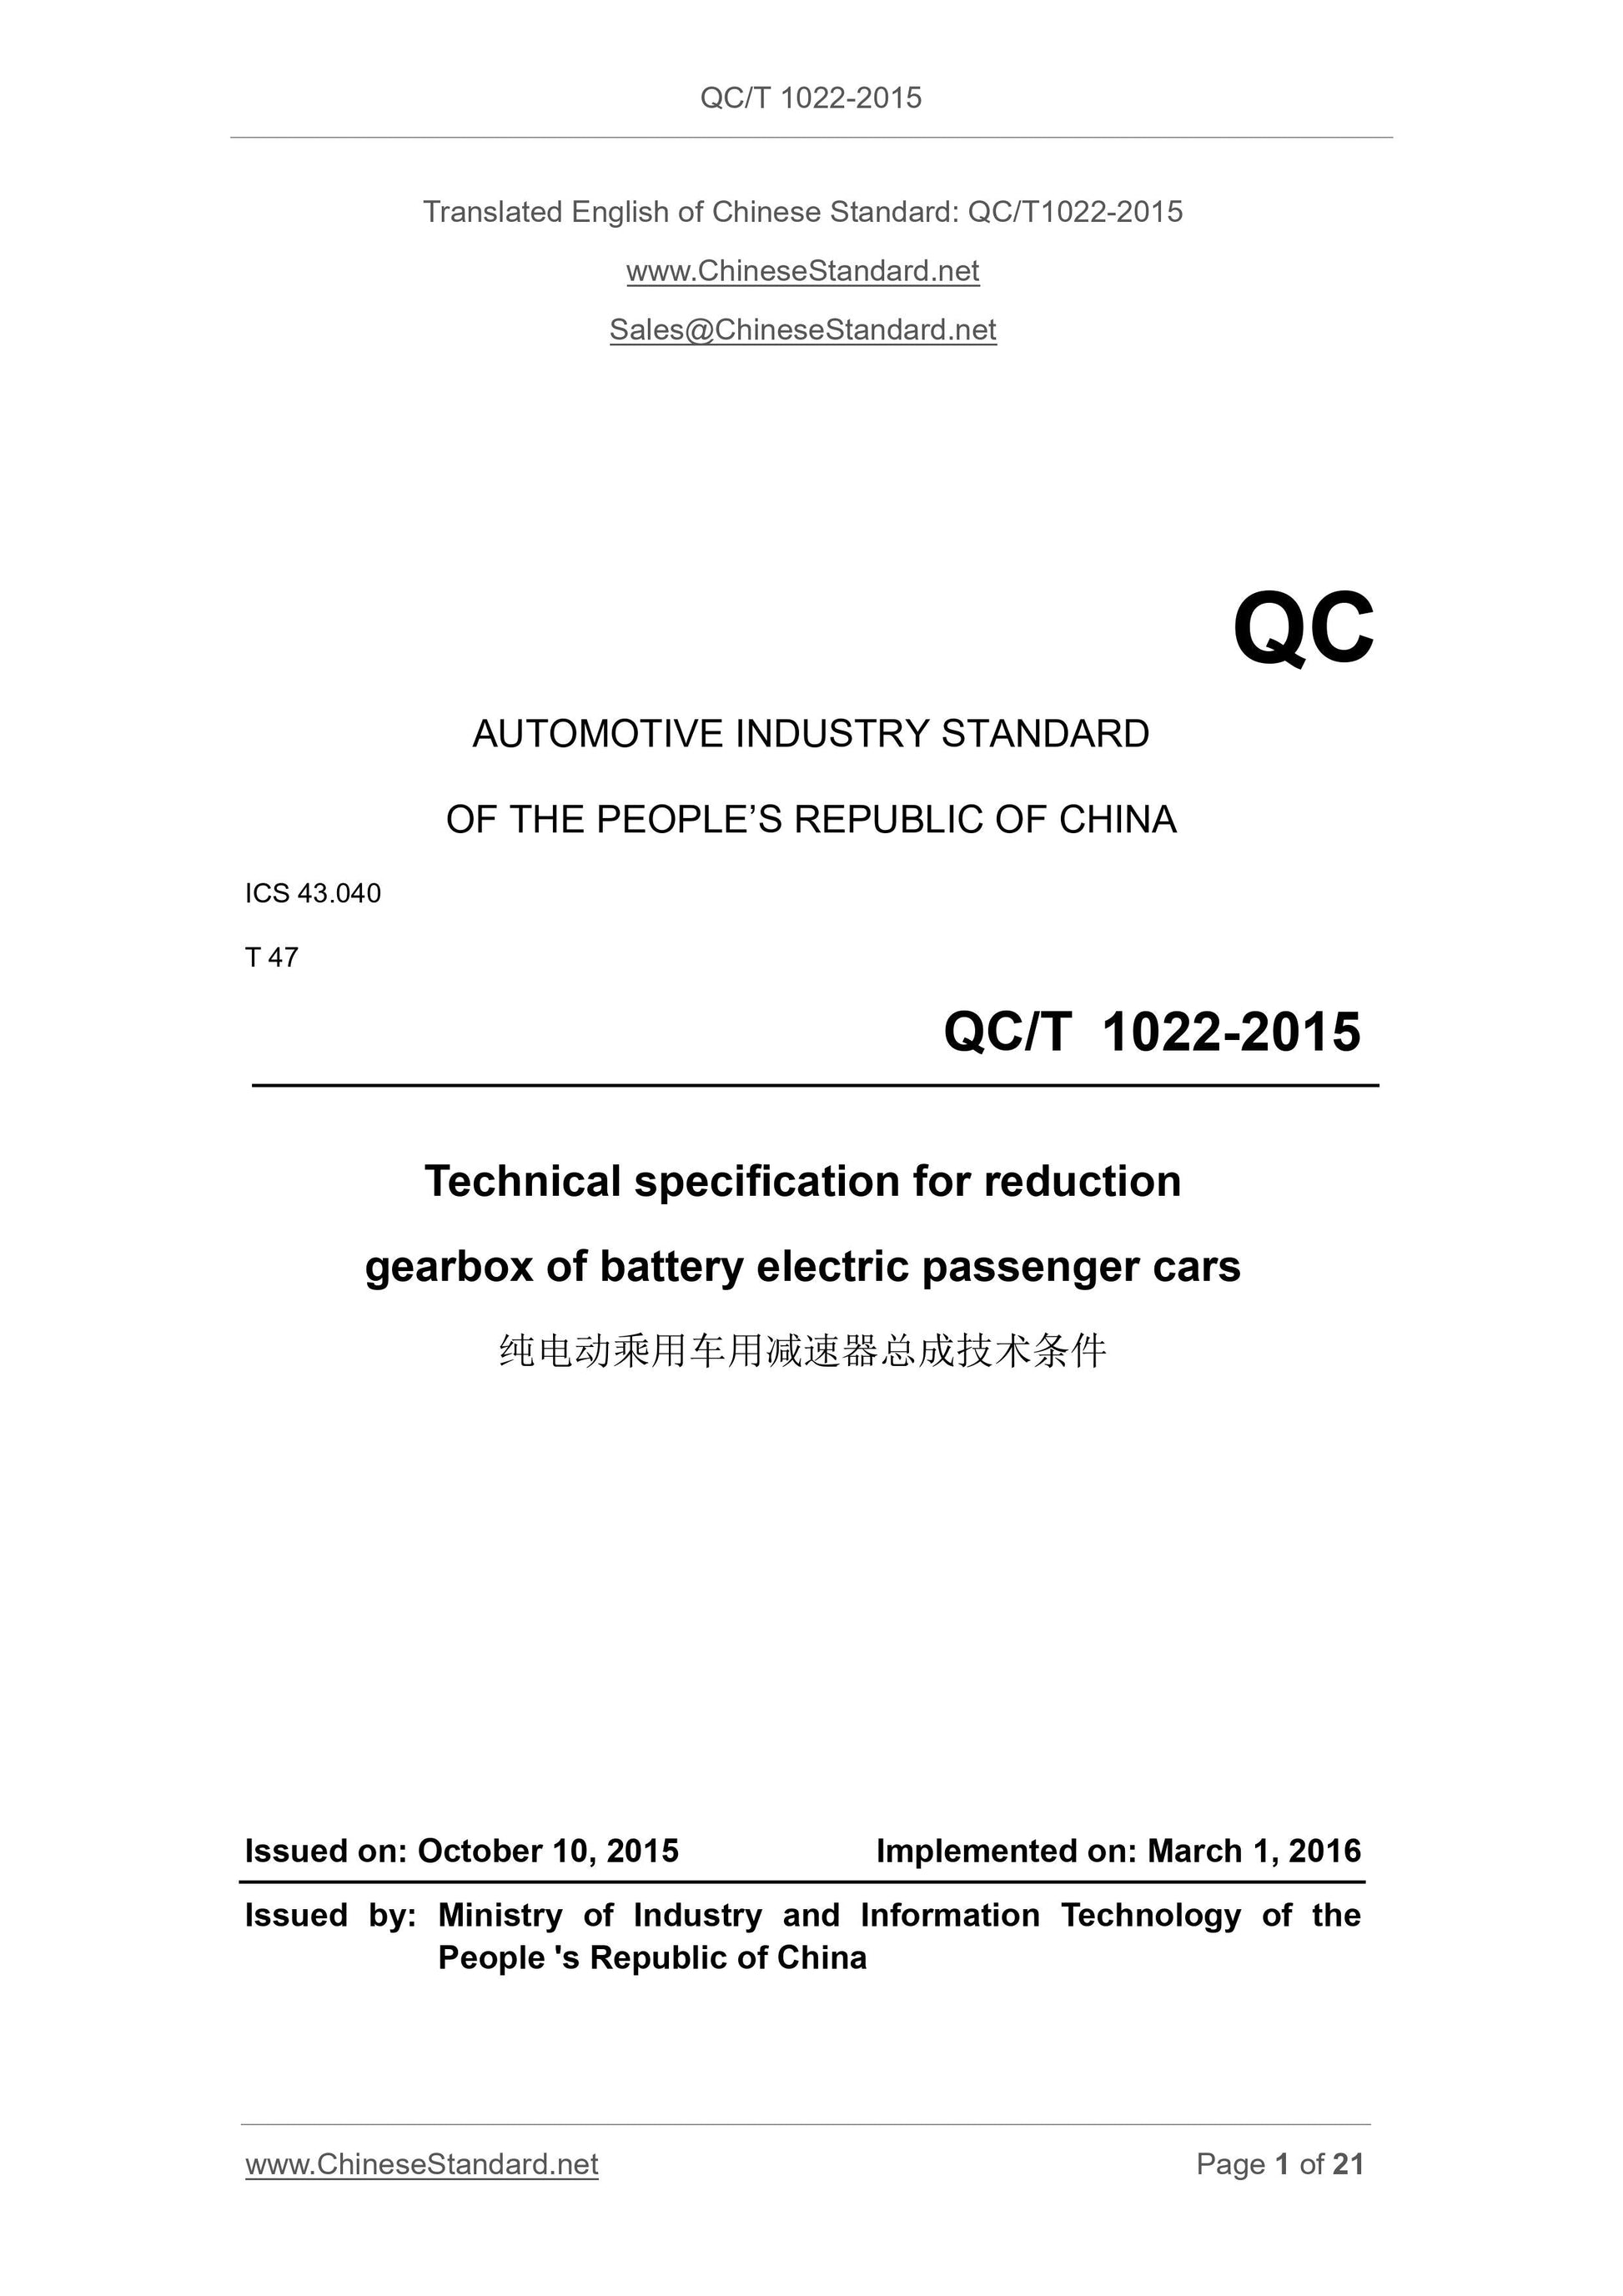 QC/T 1022-2015 Page 1